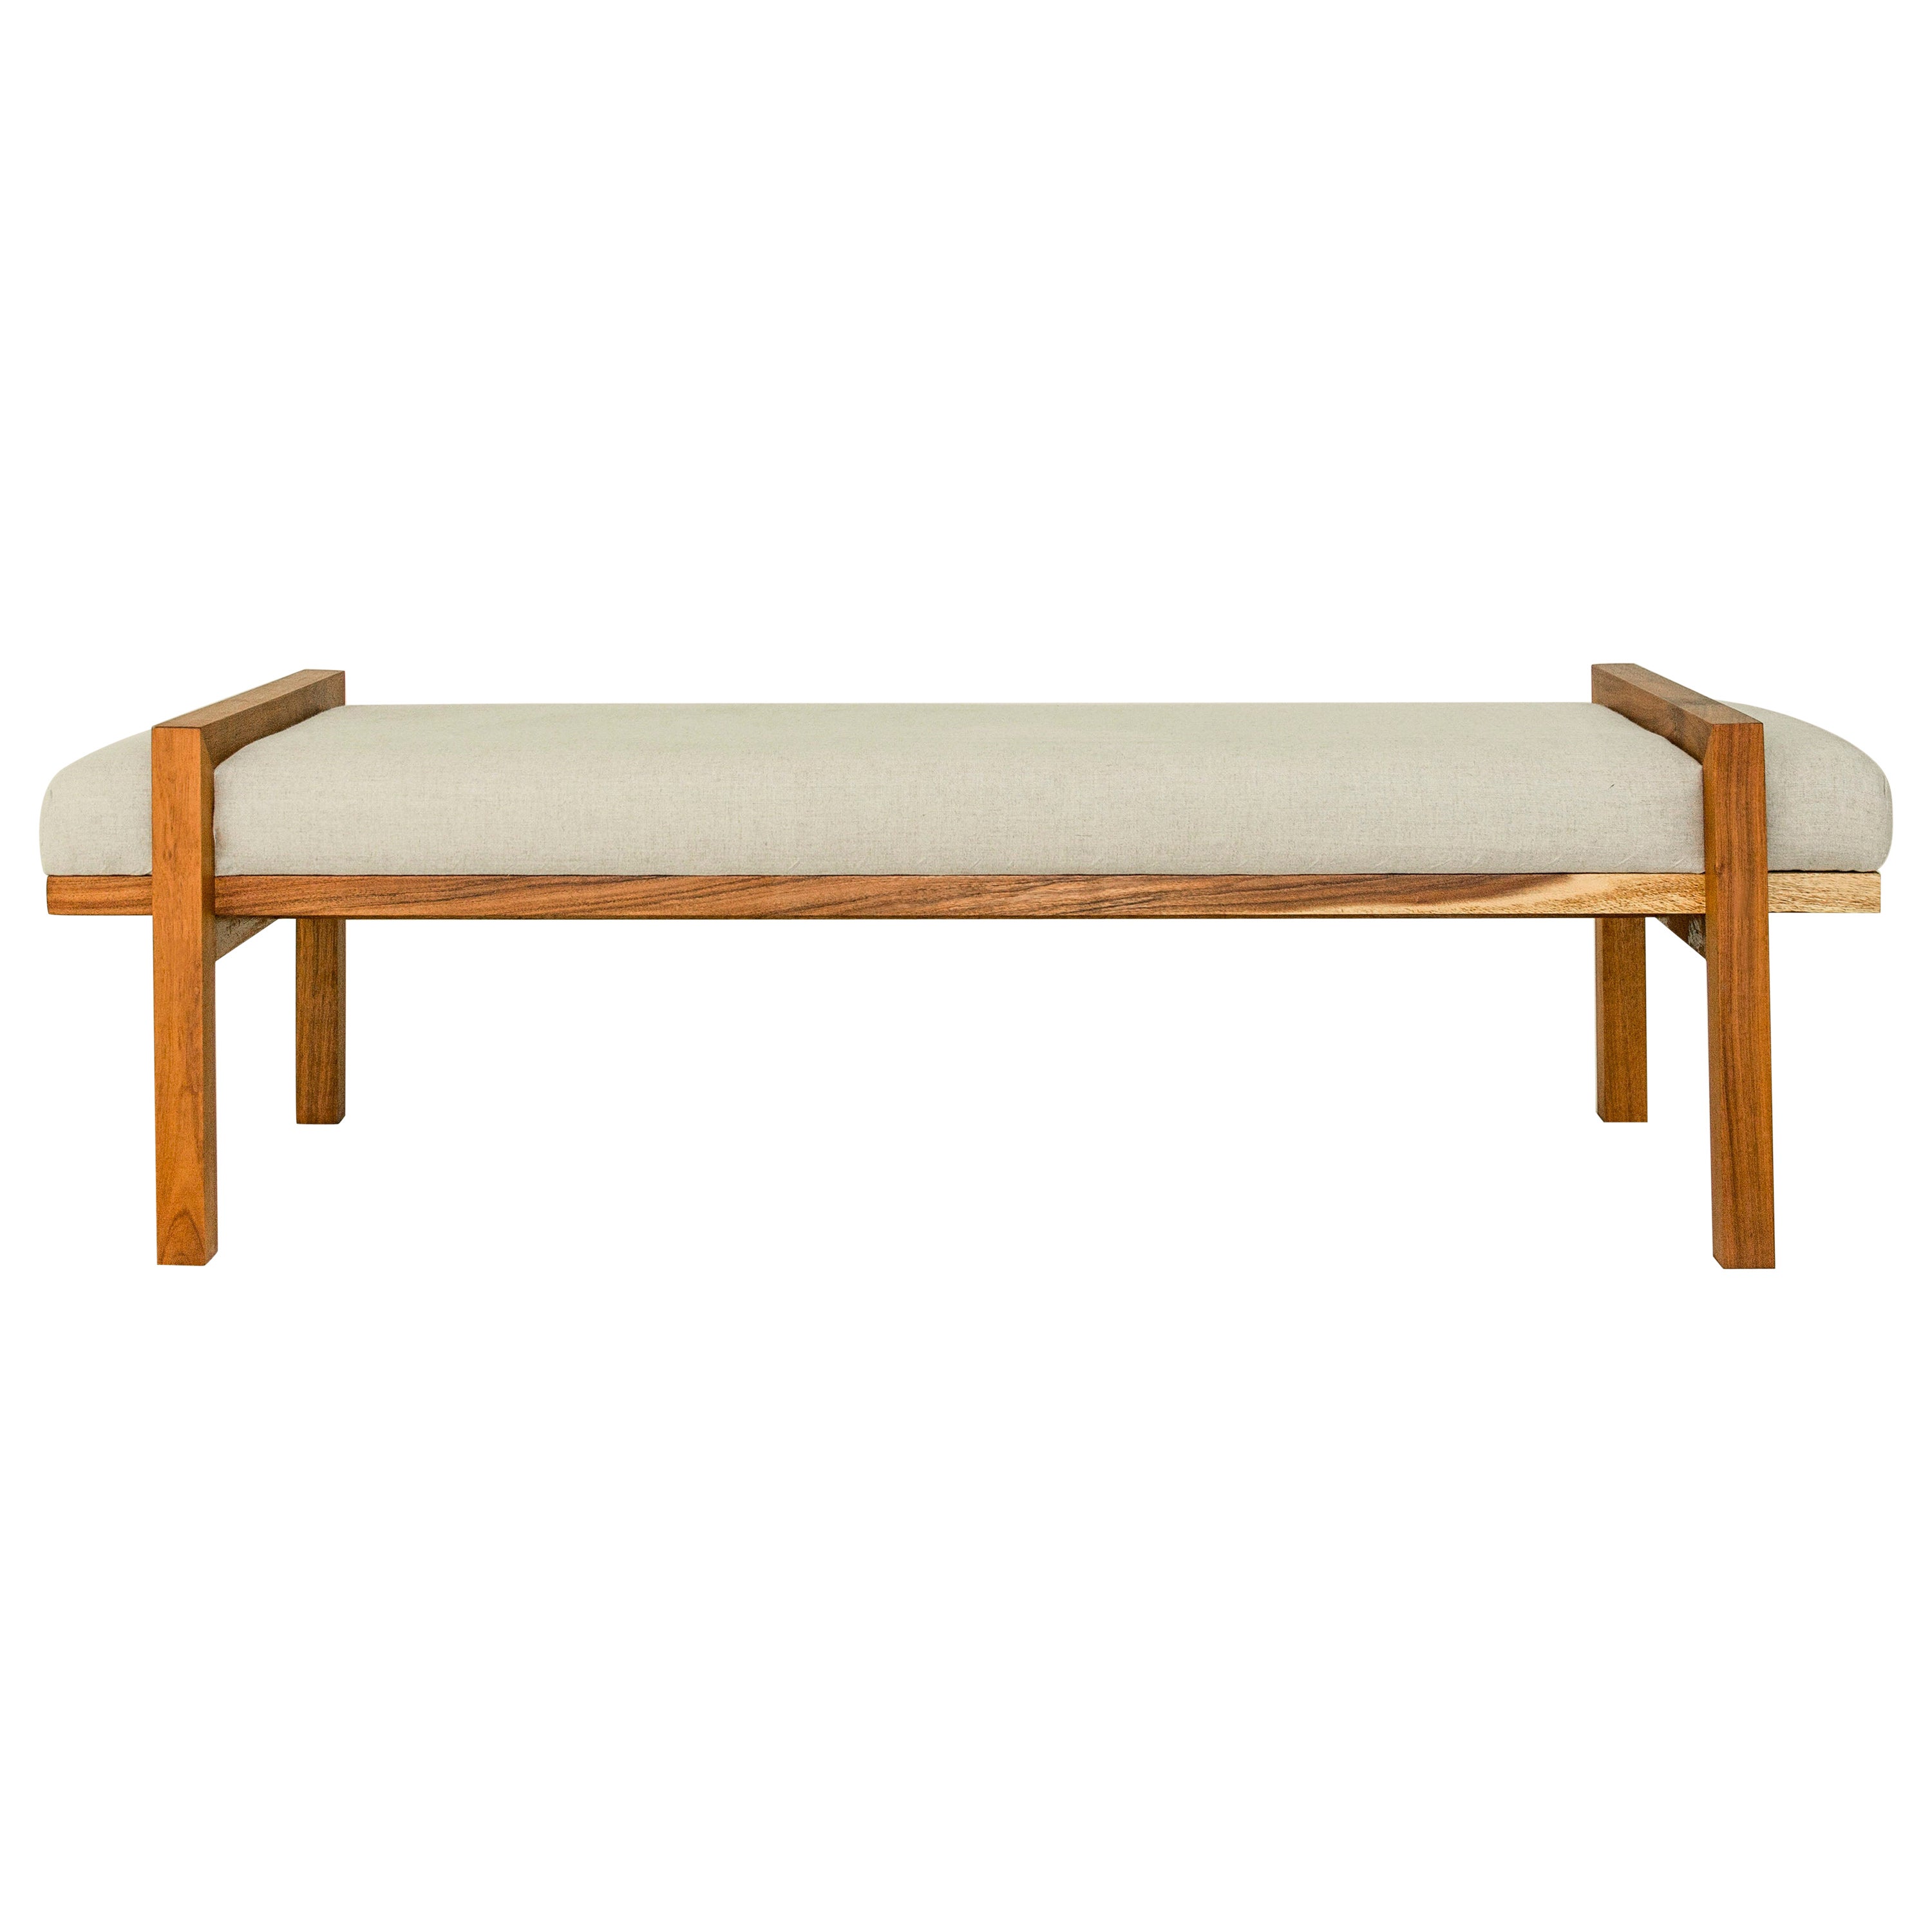 Nara Bench Made in Tzalam Wood and Linen Upholstery by Tana Karei